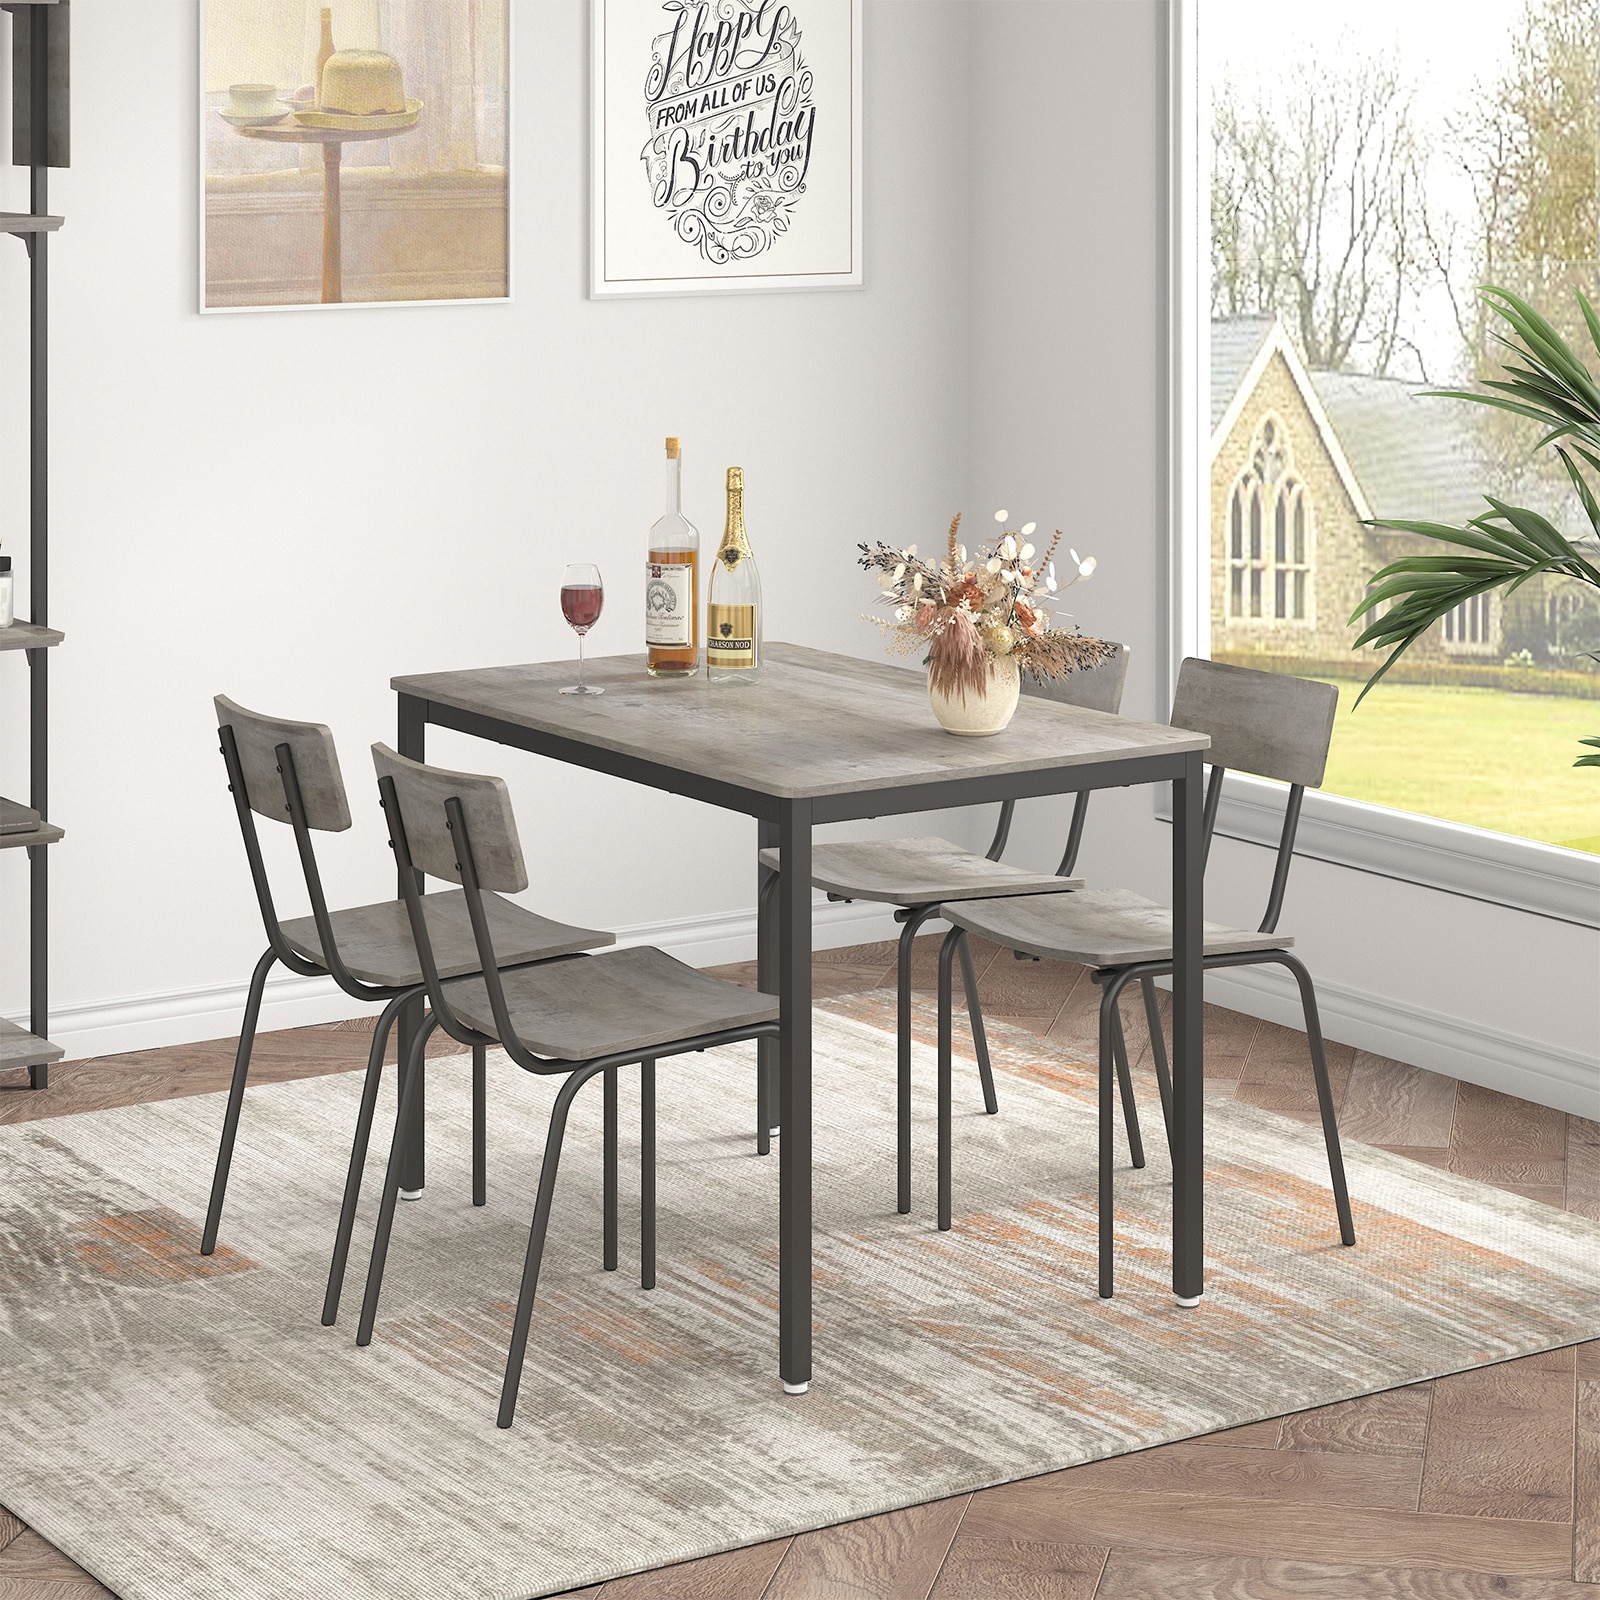 WELLFOR JHX Dining Table Set Gray Contemporary/Modern Dining Room Set ...